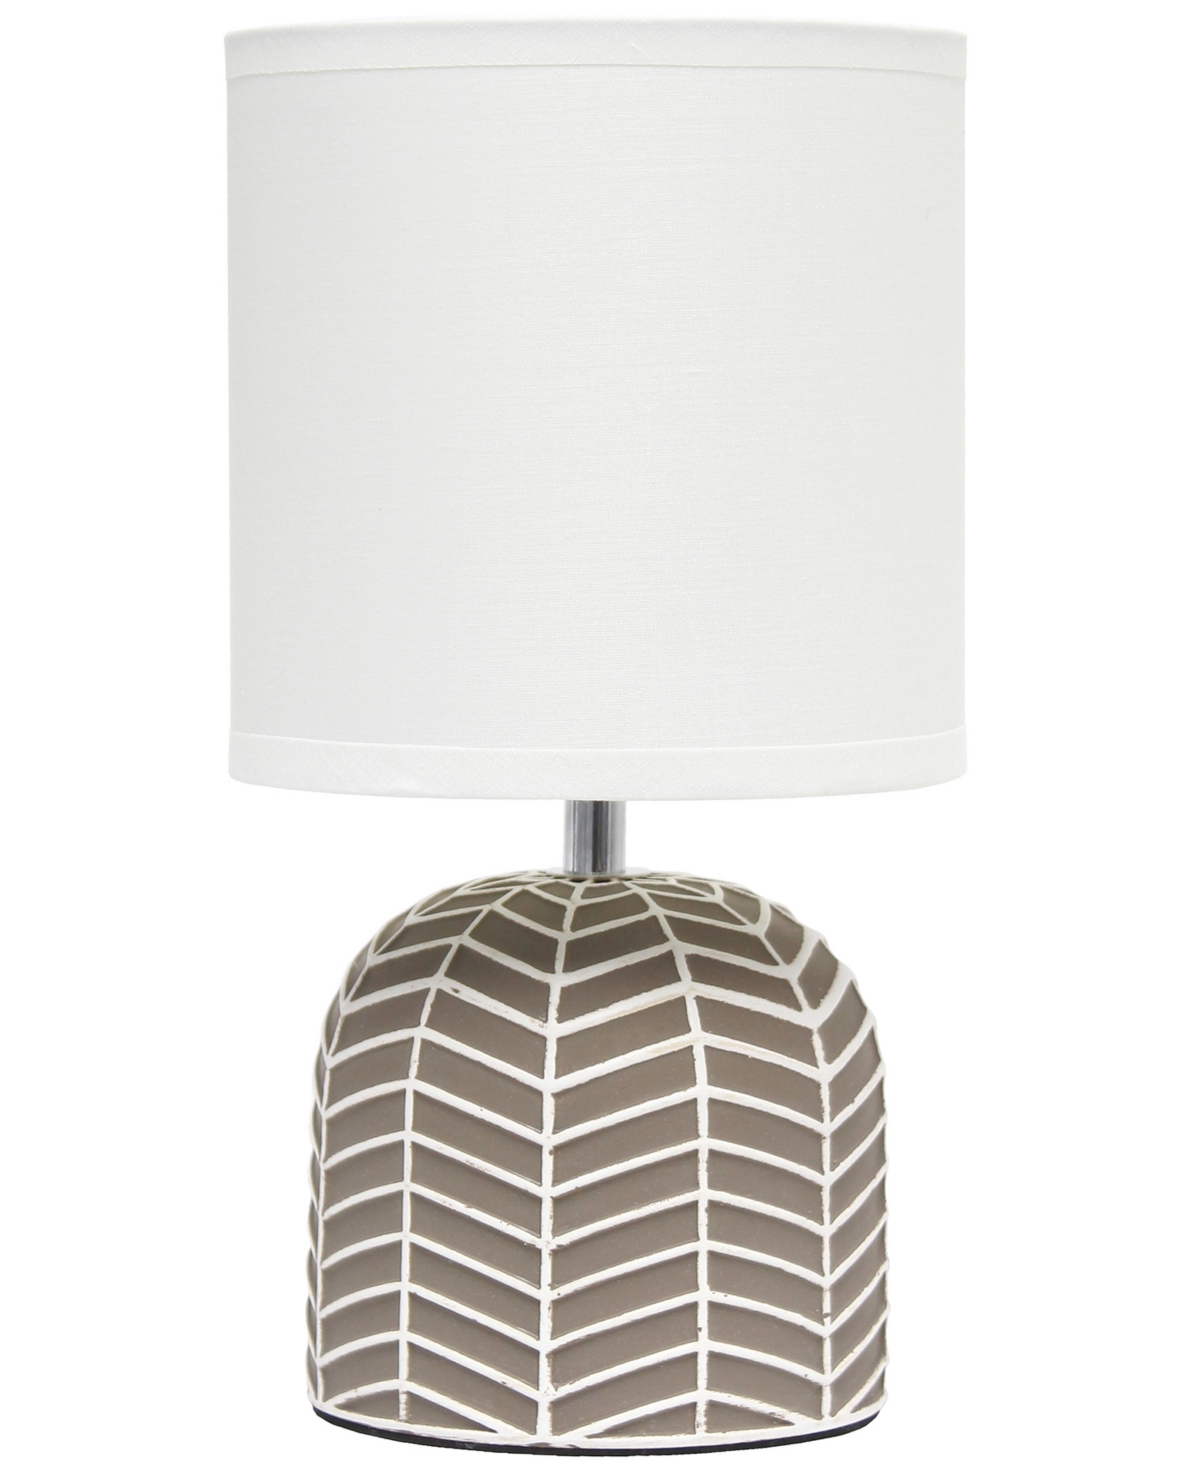 Shop Simple Designs 10.43" Petite Contemporary Webbed Waves Base Bedside Table Desk Lamp With White Fabric Drum Shade In Taupe